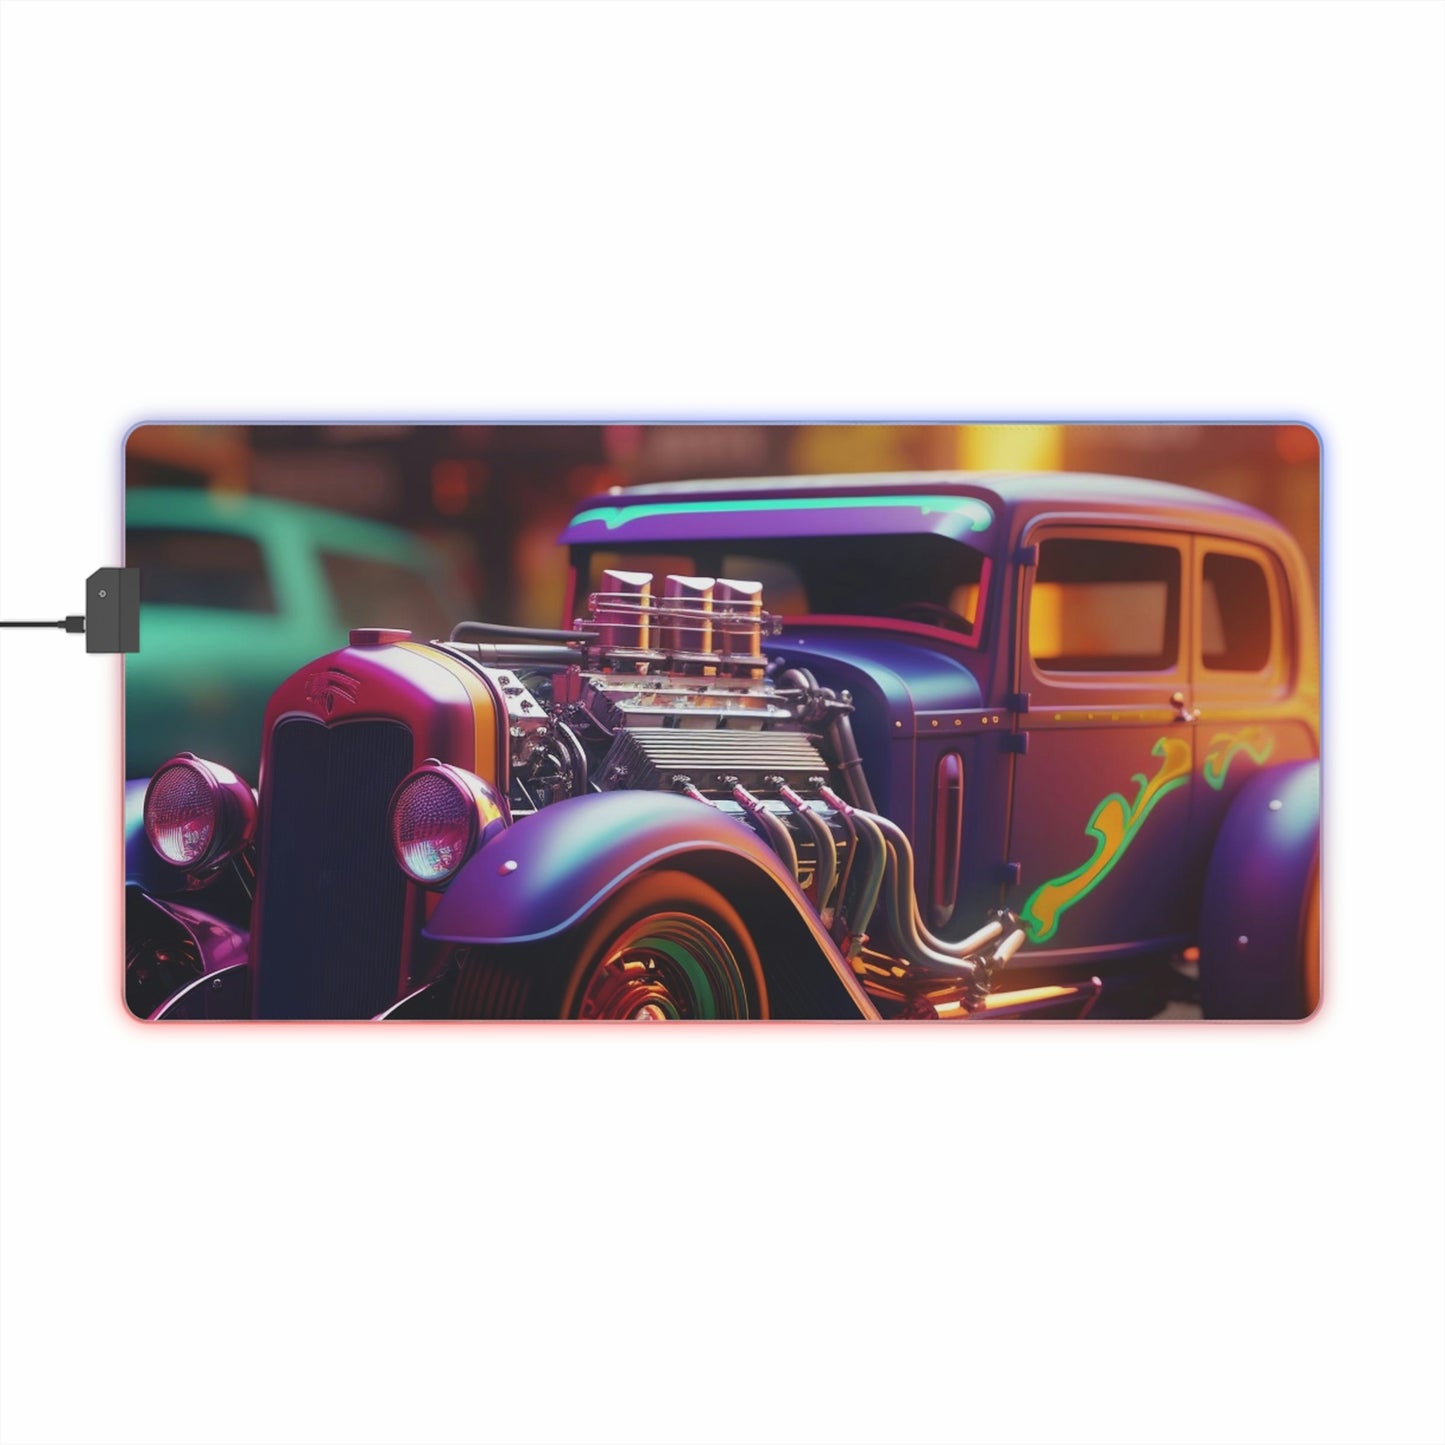 LED Gaming Mouse Pad Hyper Colorful Hotrod 3